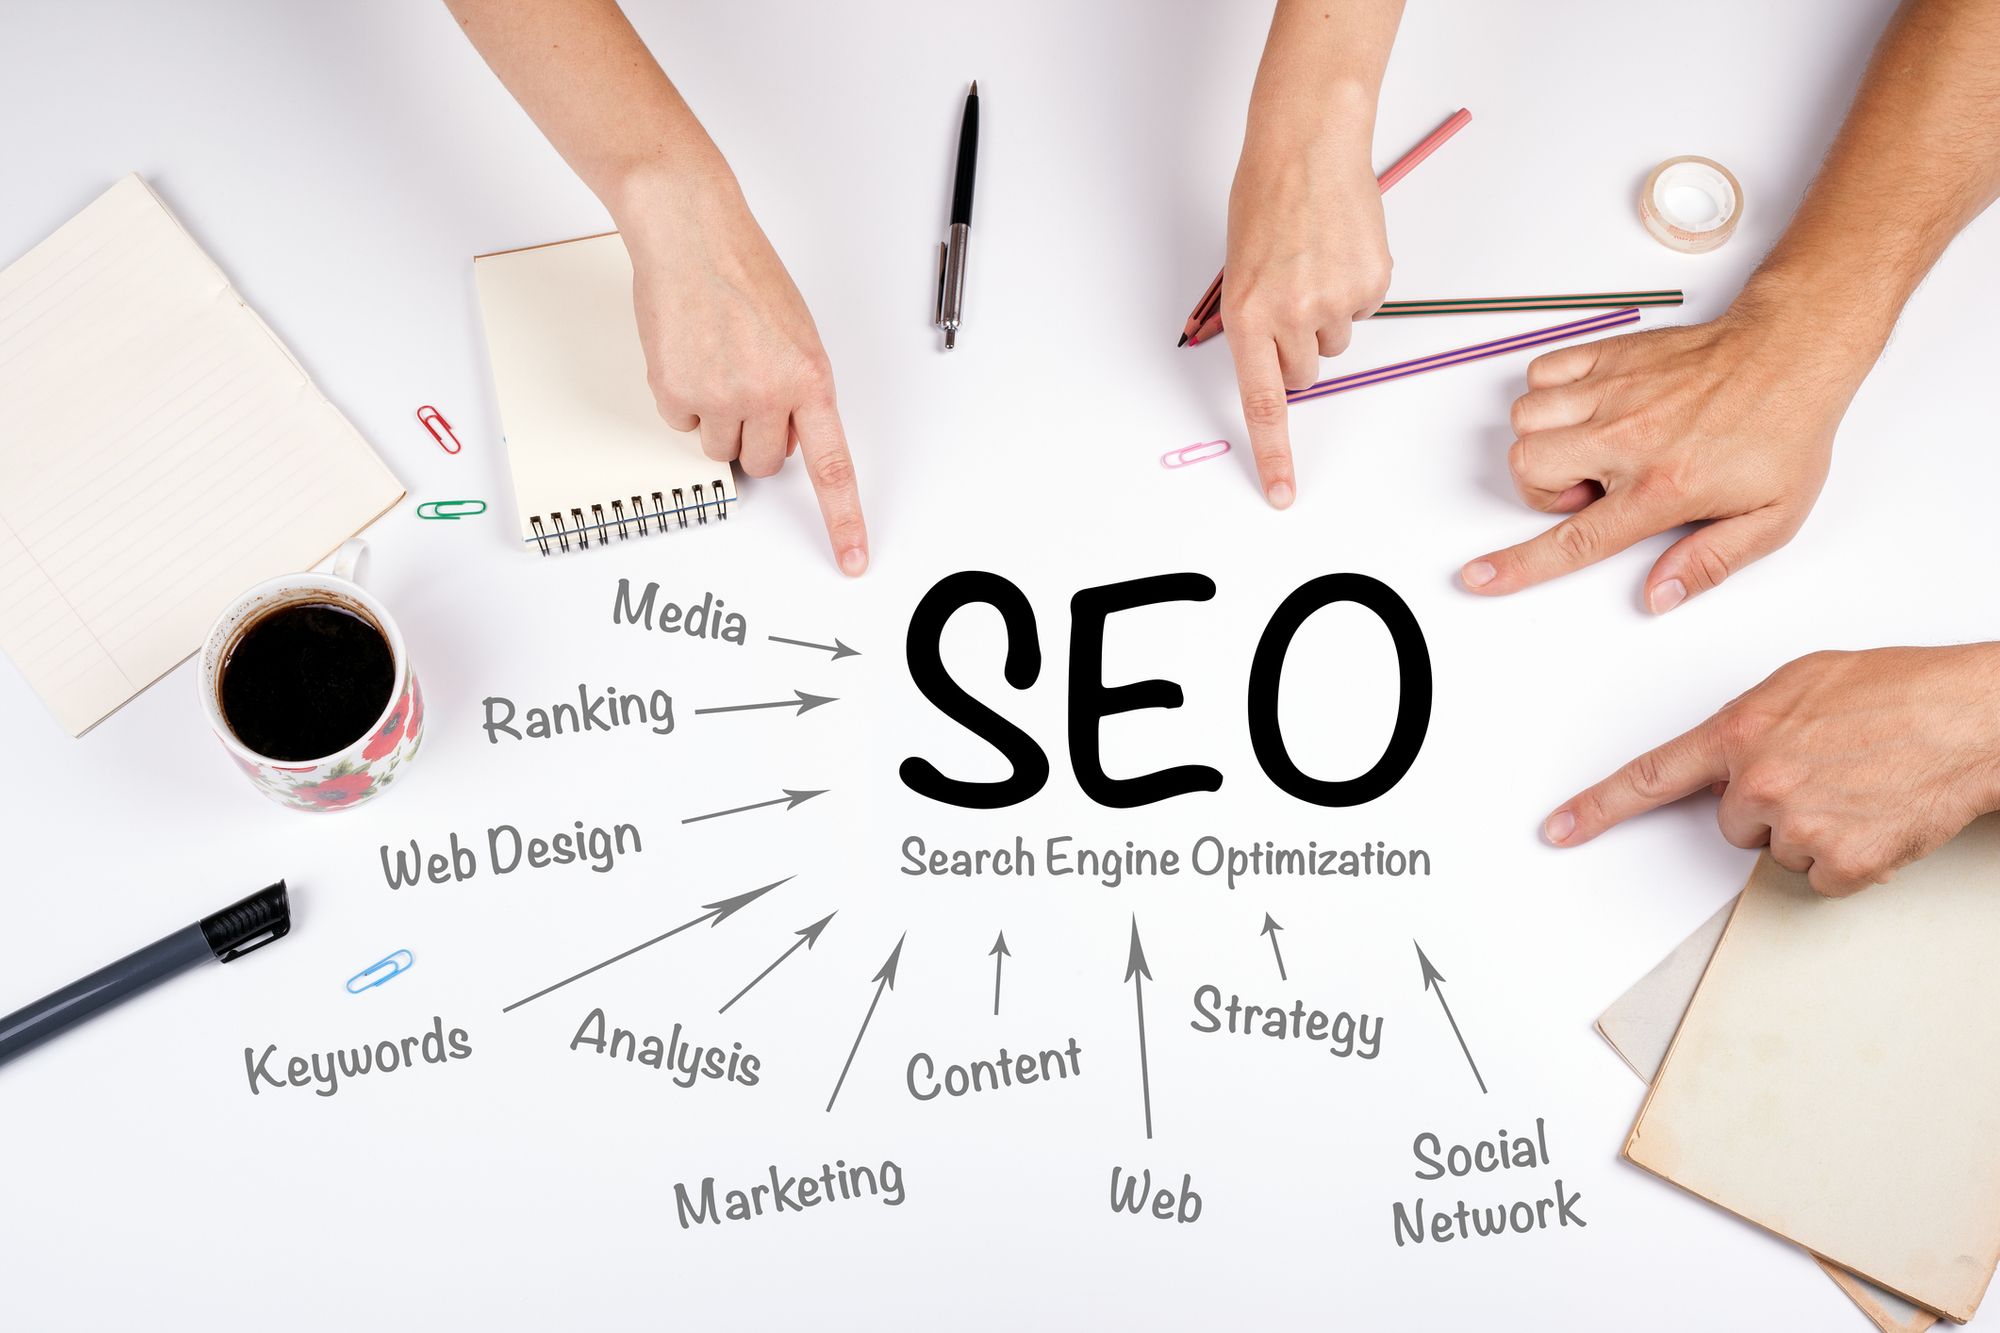 5 Key Tips To Choose SEO Agency For Your Small Business